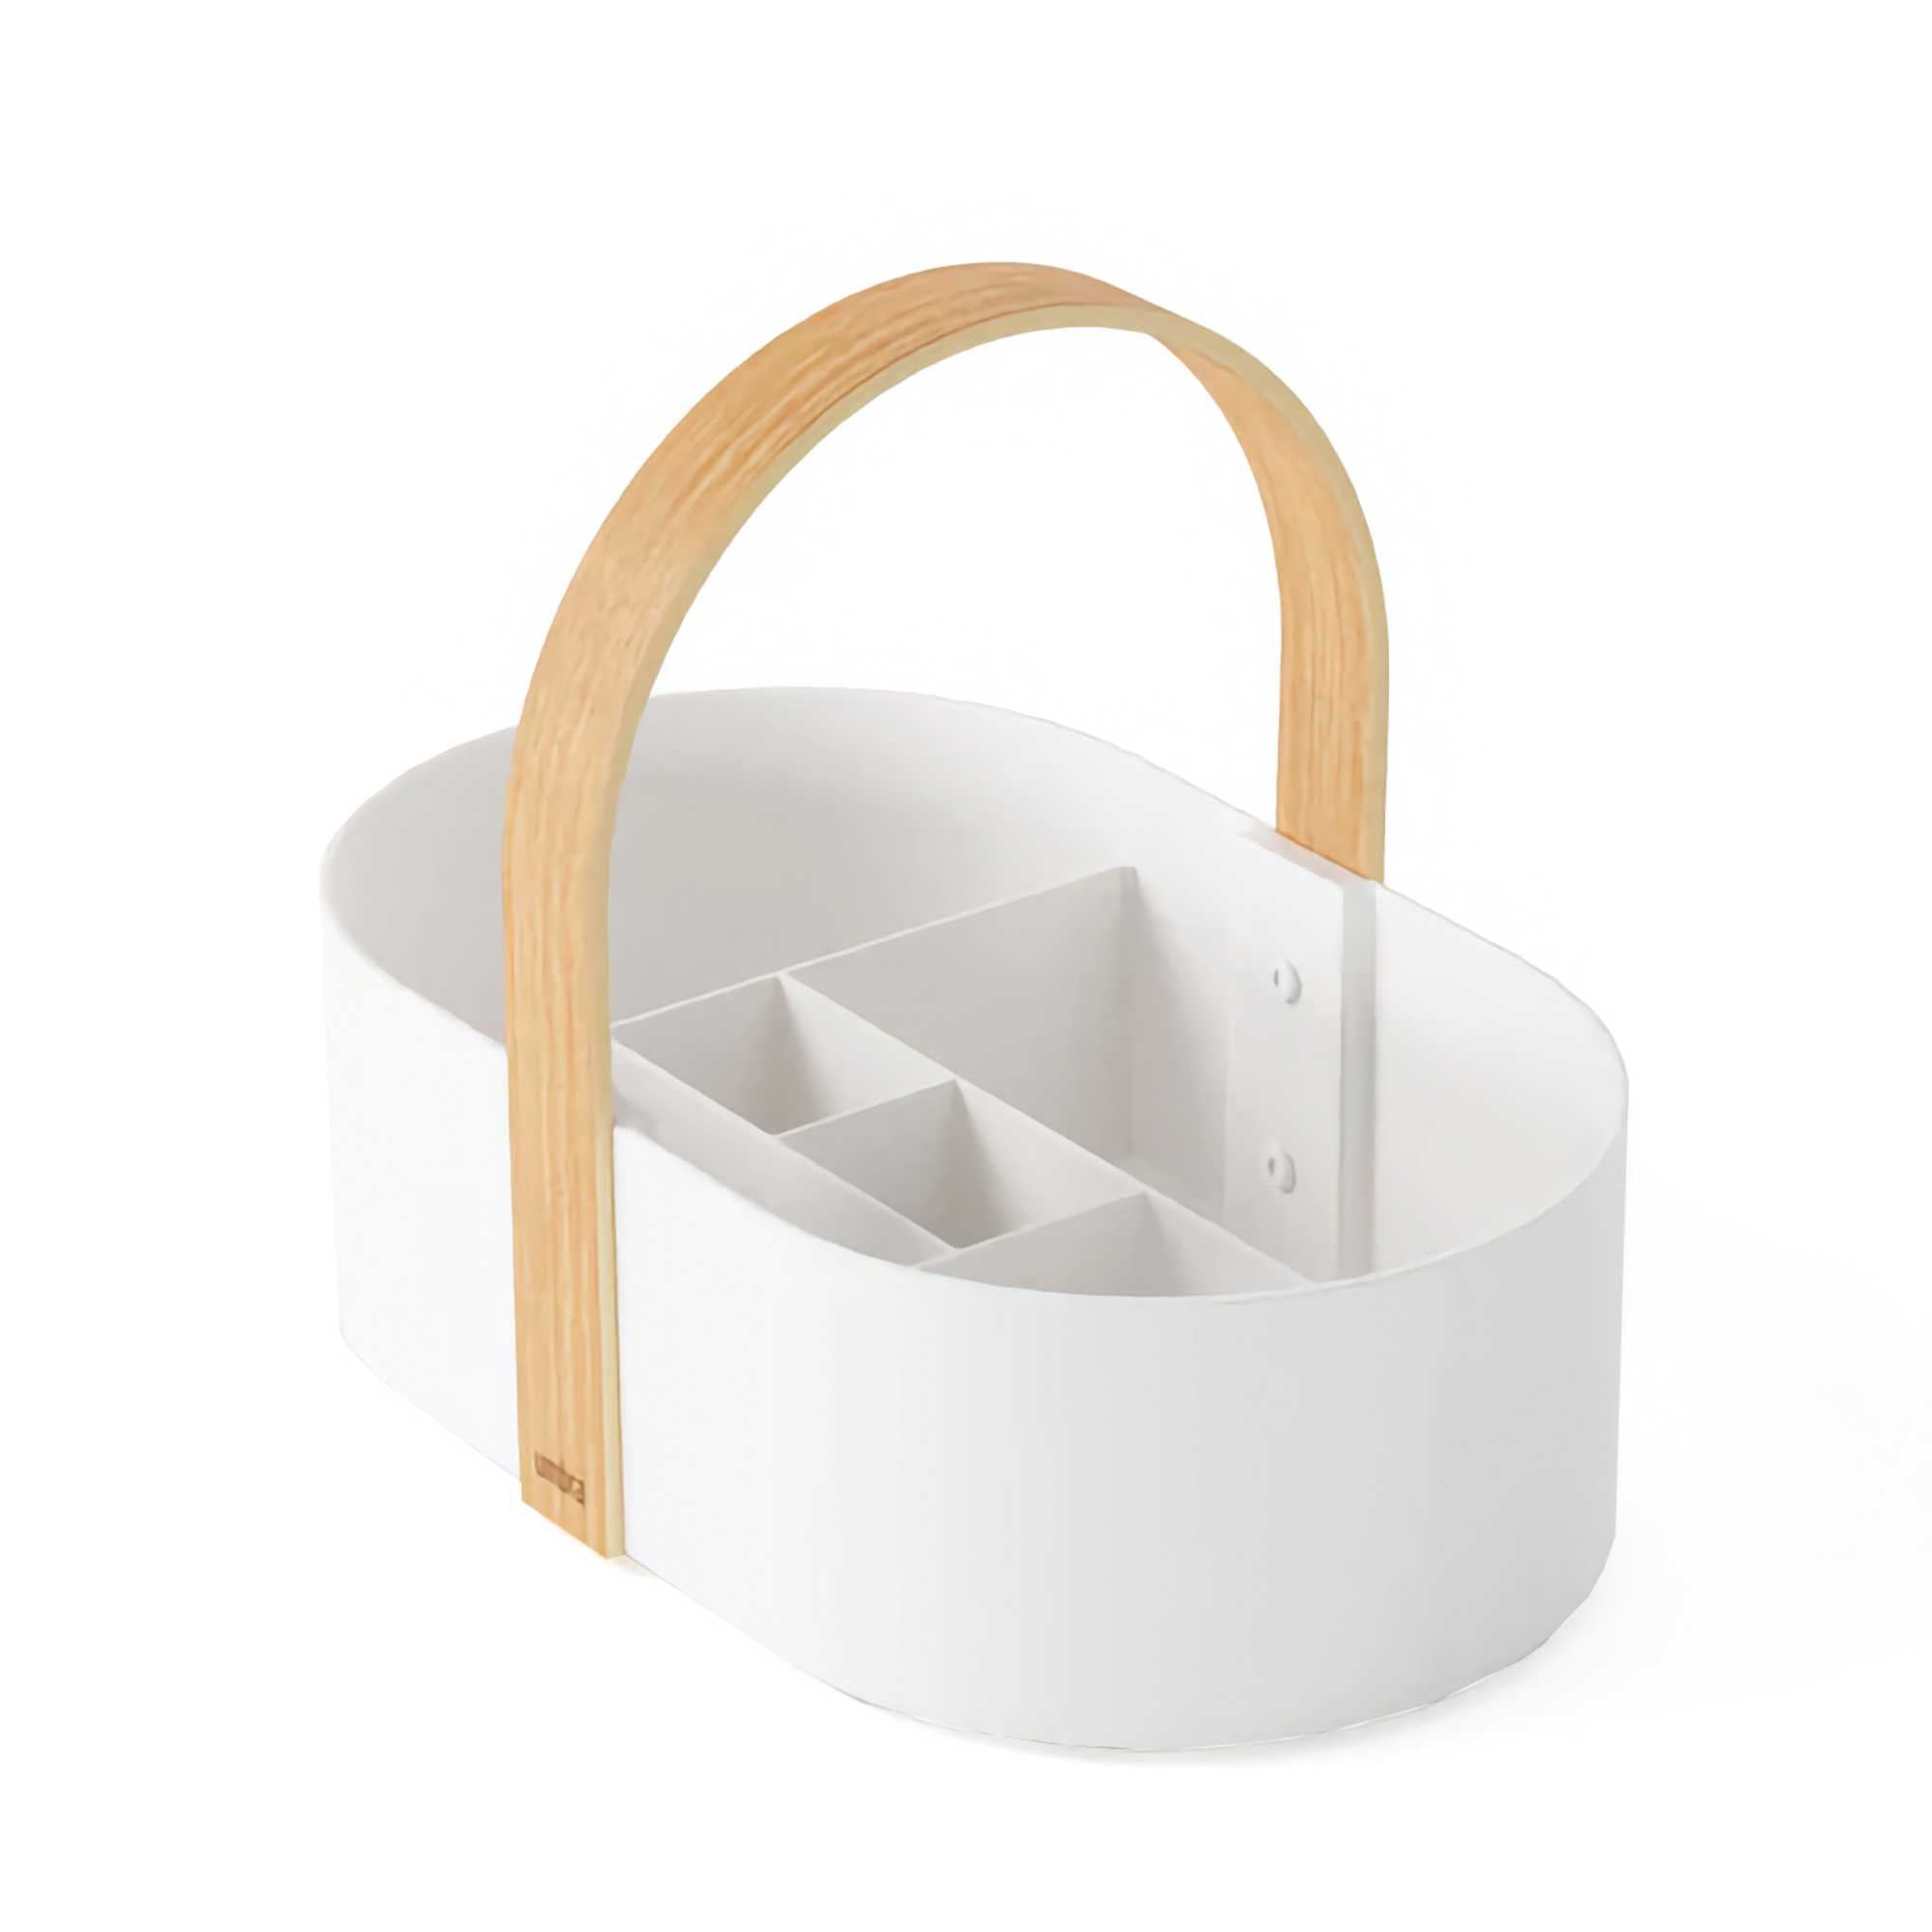 Umbra Bellwood Caddy White/Natural